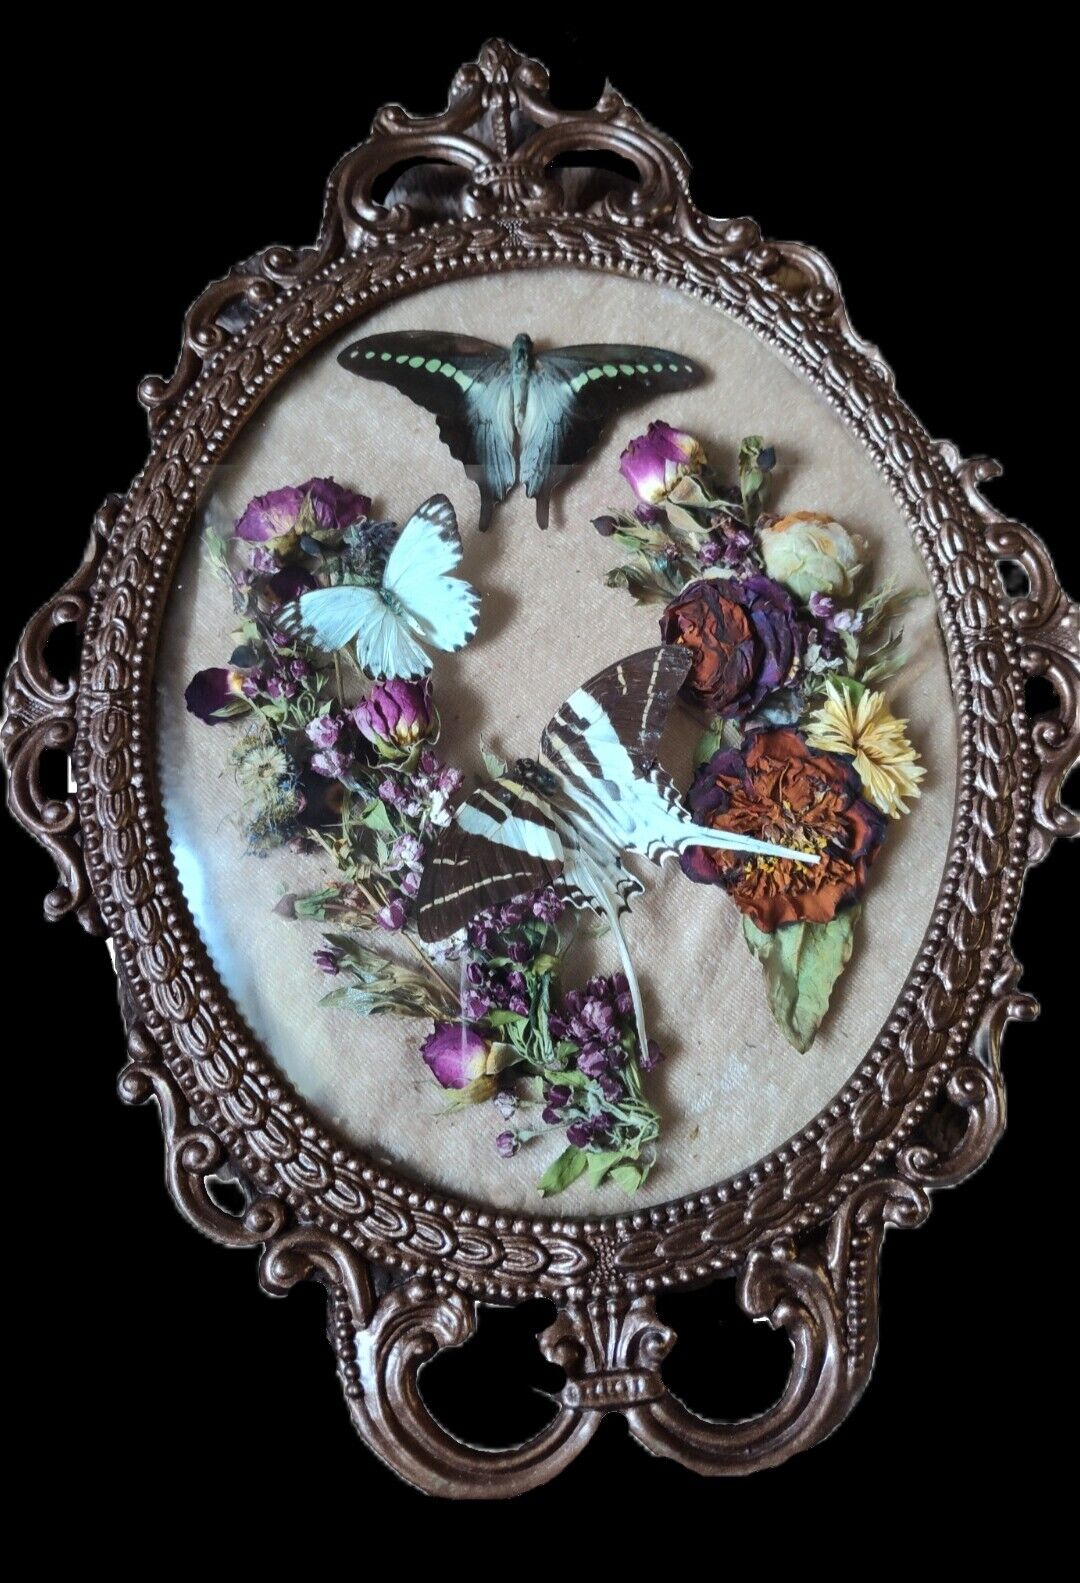 Real Taxidermy W/ Butterflies And DayMoth Ornate Convex Glass Frame Cottagecore 